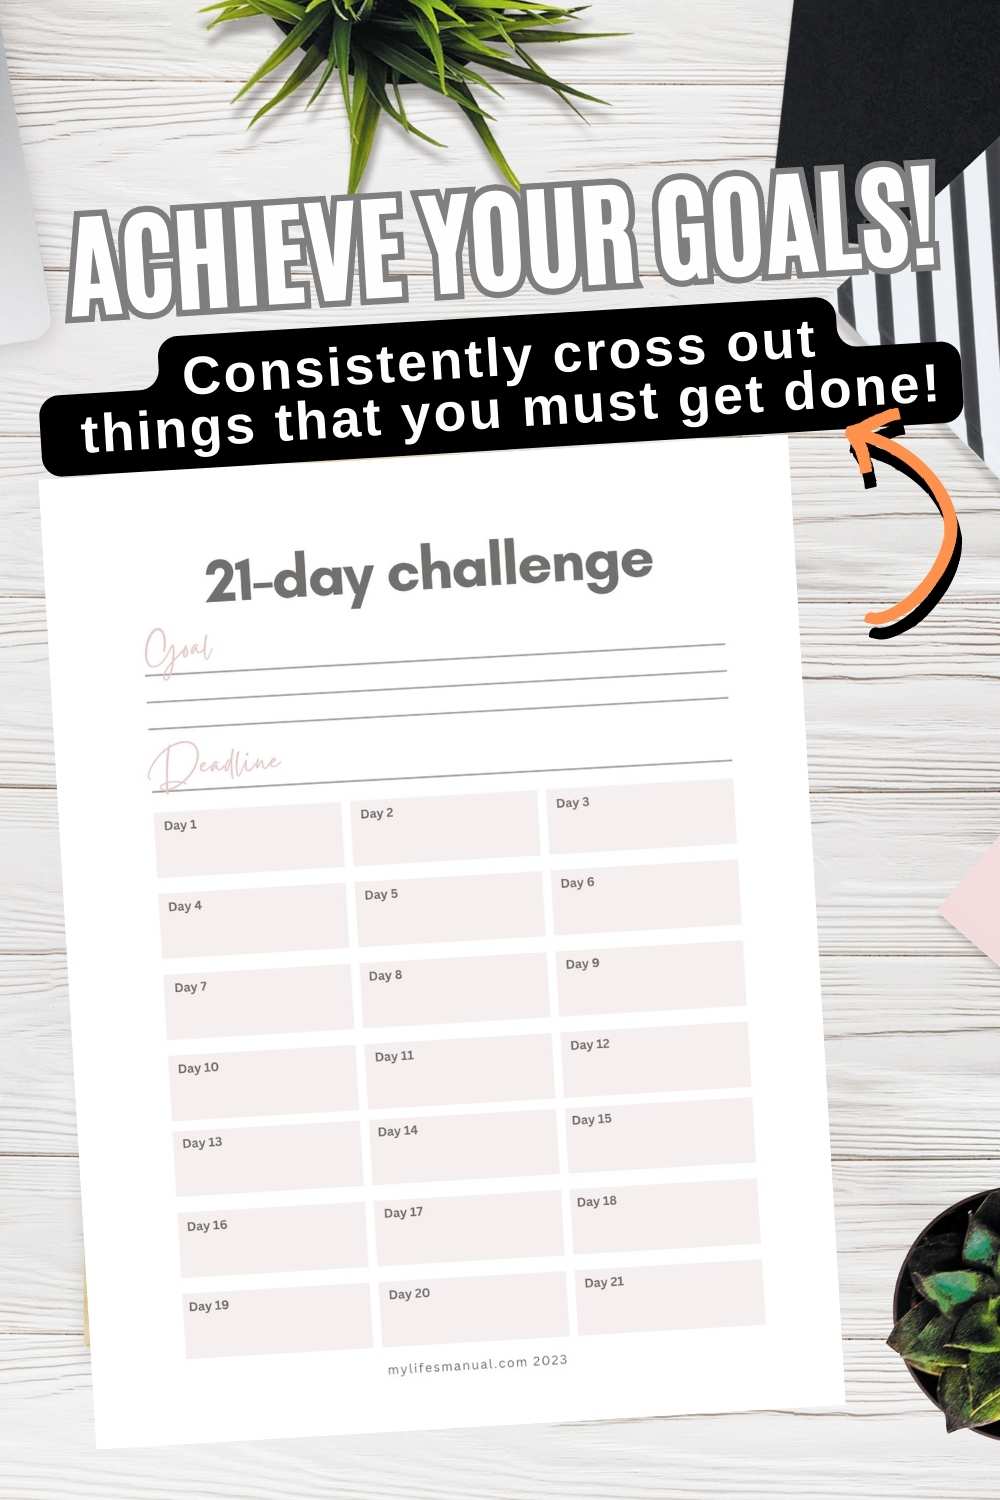 Achieve your goals by consistently crossing out your to do list. Create good habits by using this one-page printable planner.